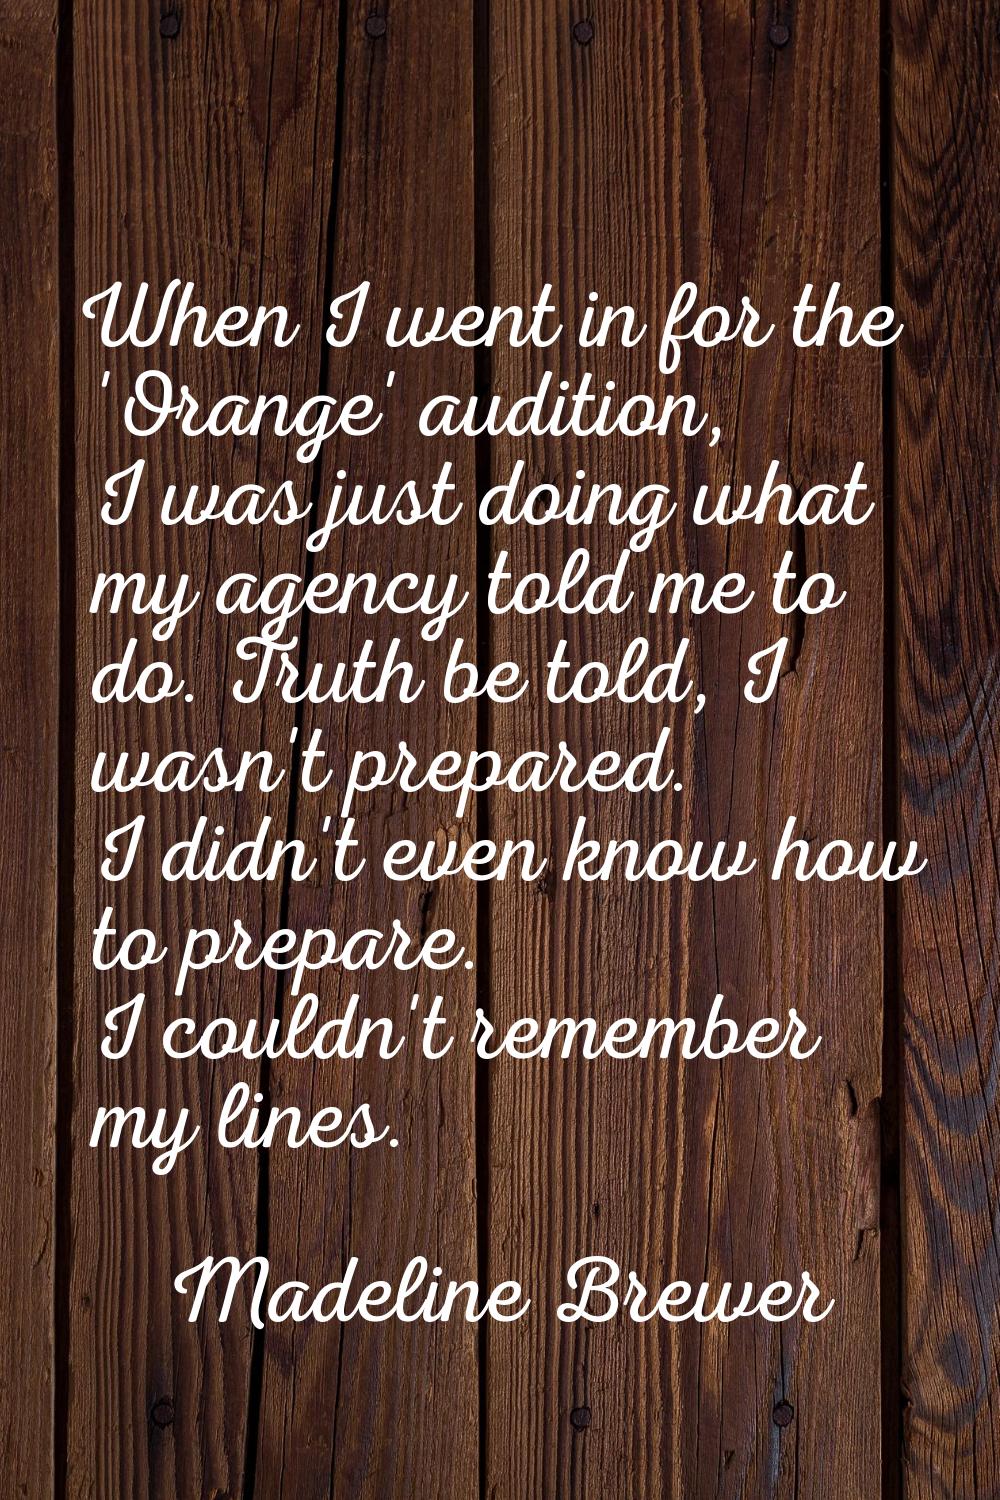 When I went in for the 'Orange' audition, I was just doing what my agency told me to do. Truth be t